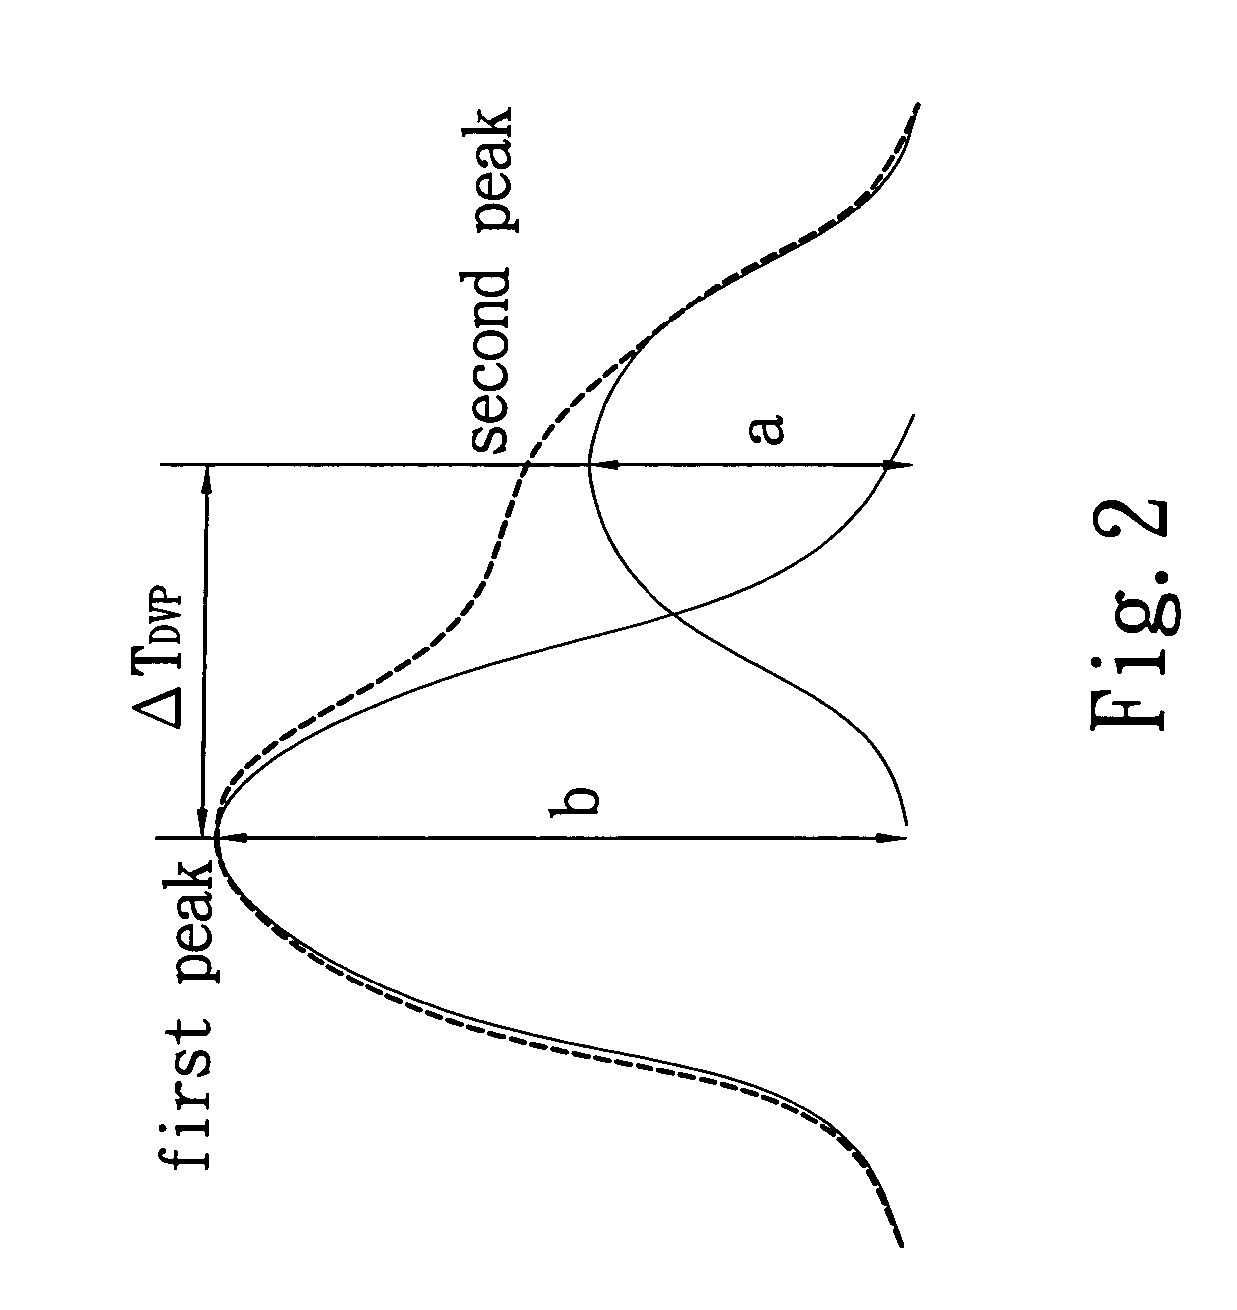 Integrated physiological signal assessing device